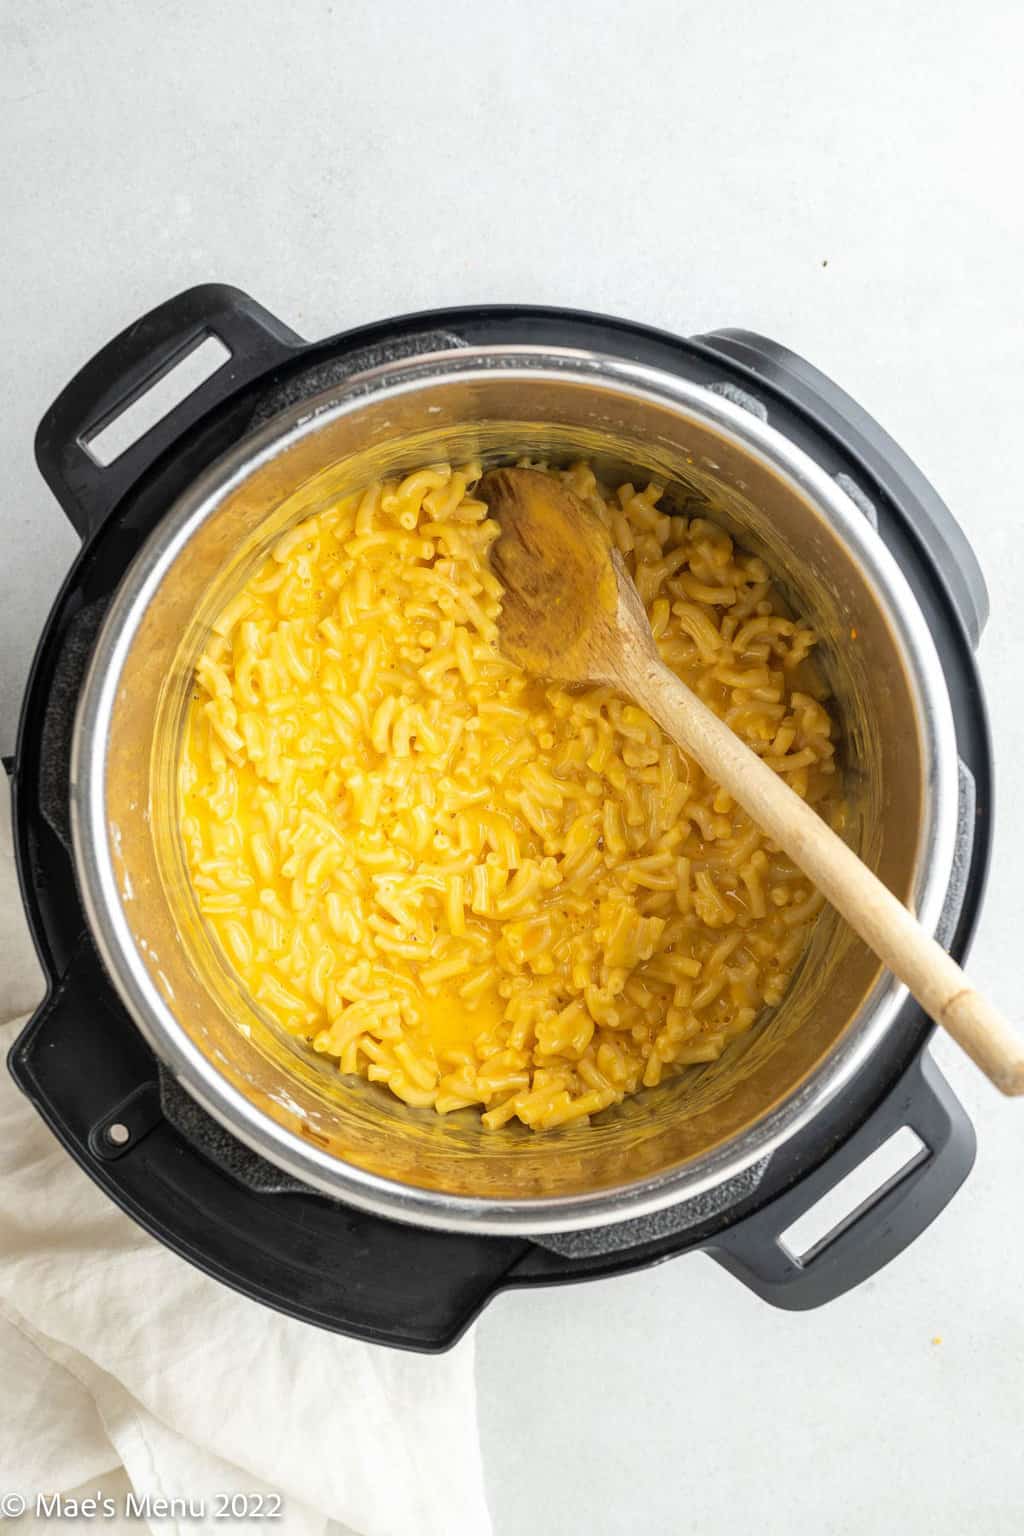 Kraft mac and cheese and a wooden spoon in the Instant Pot.